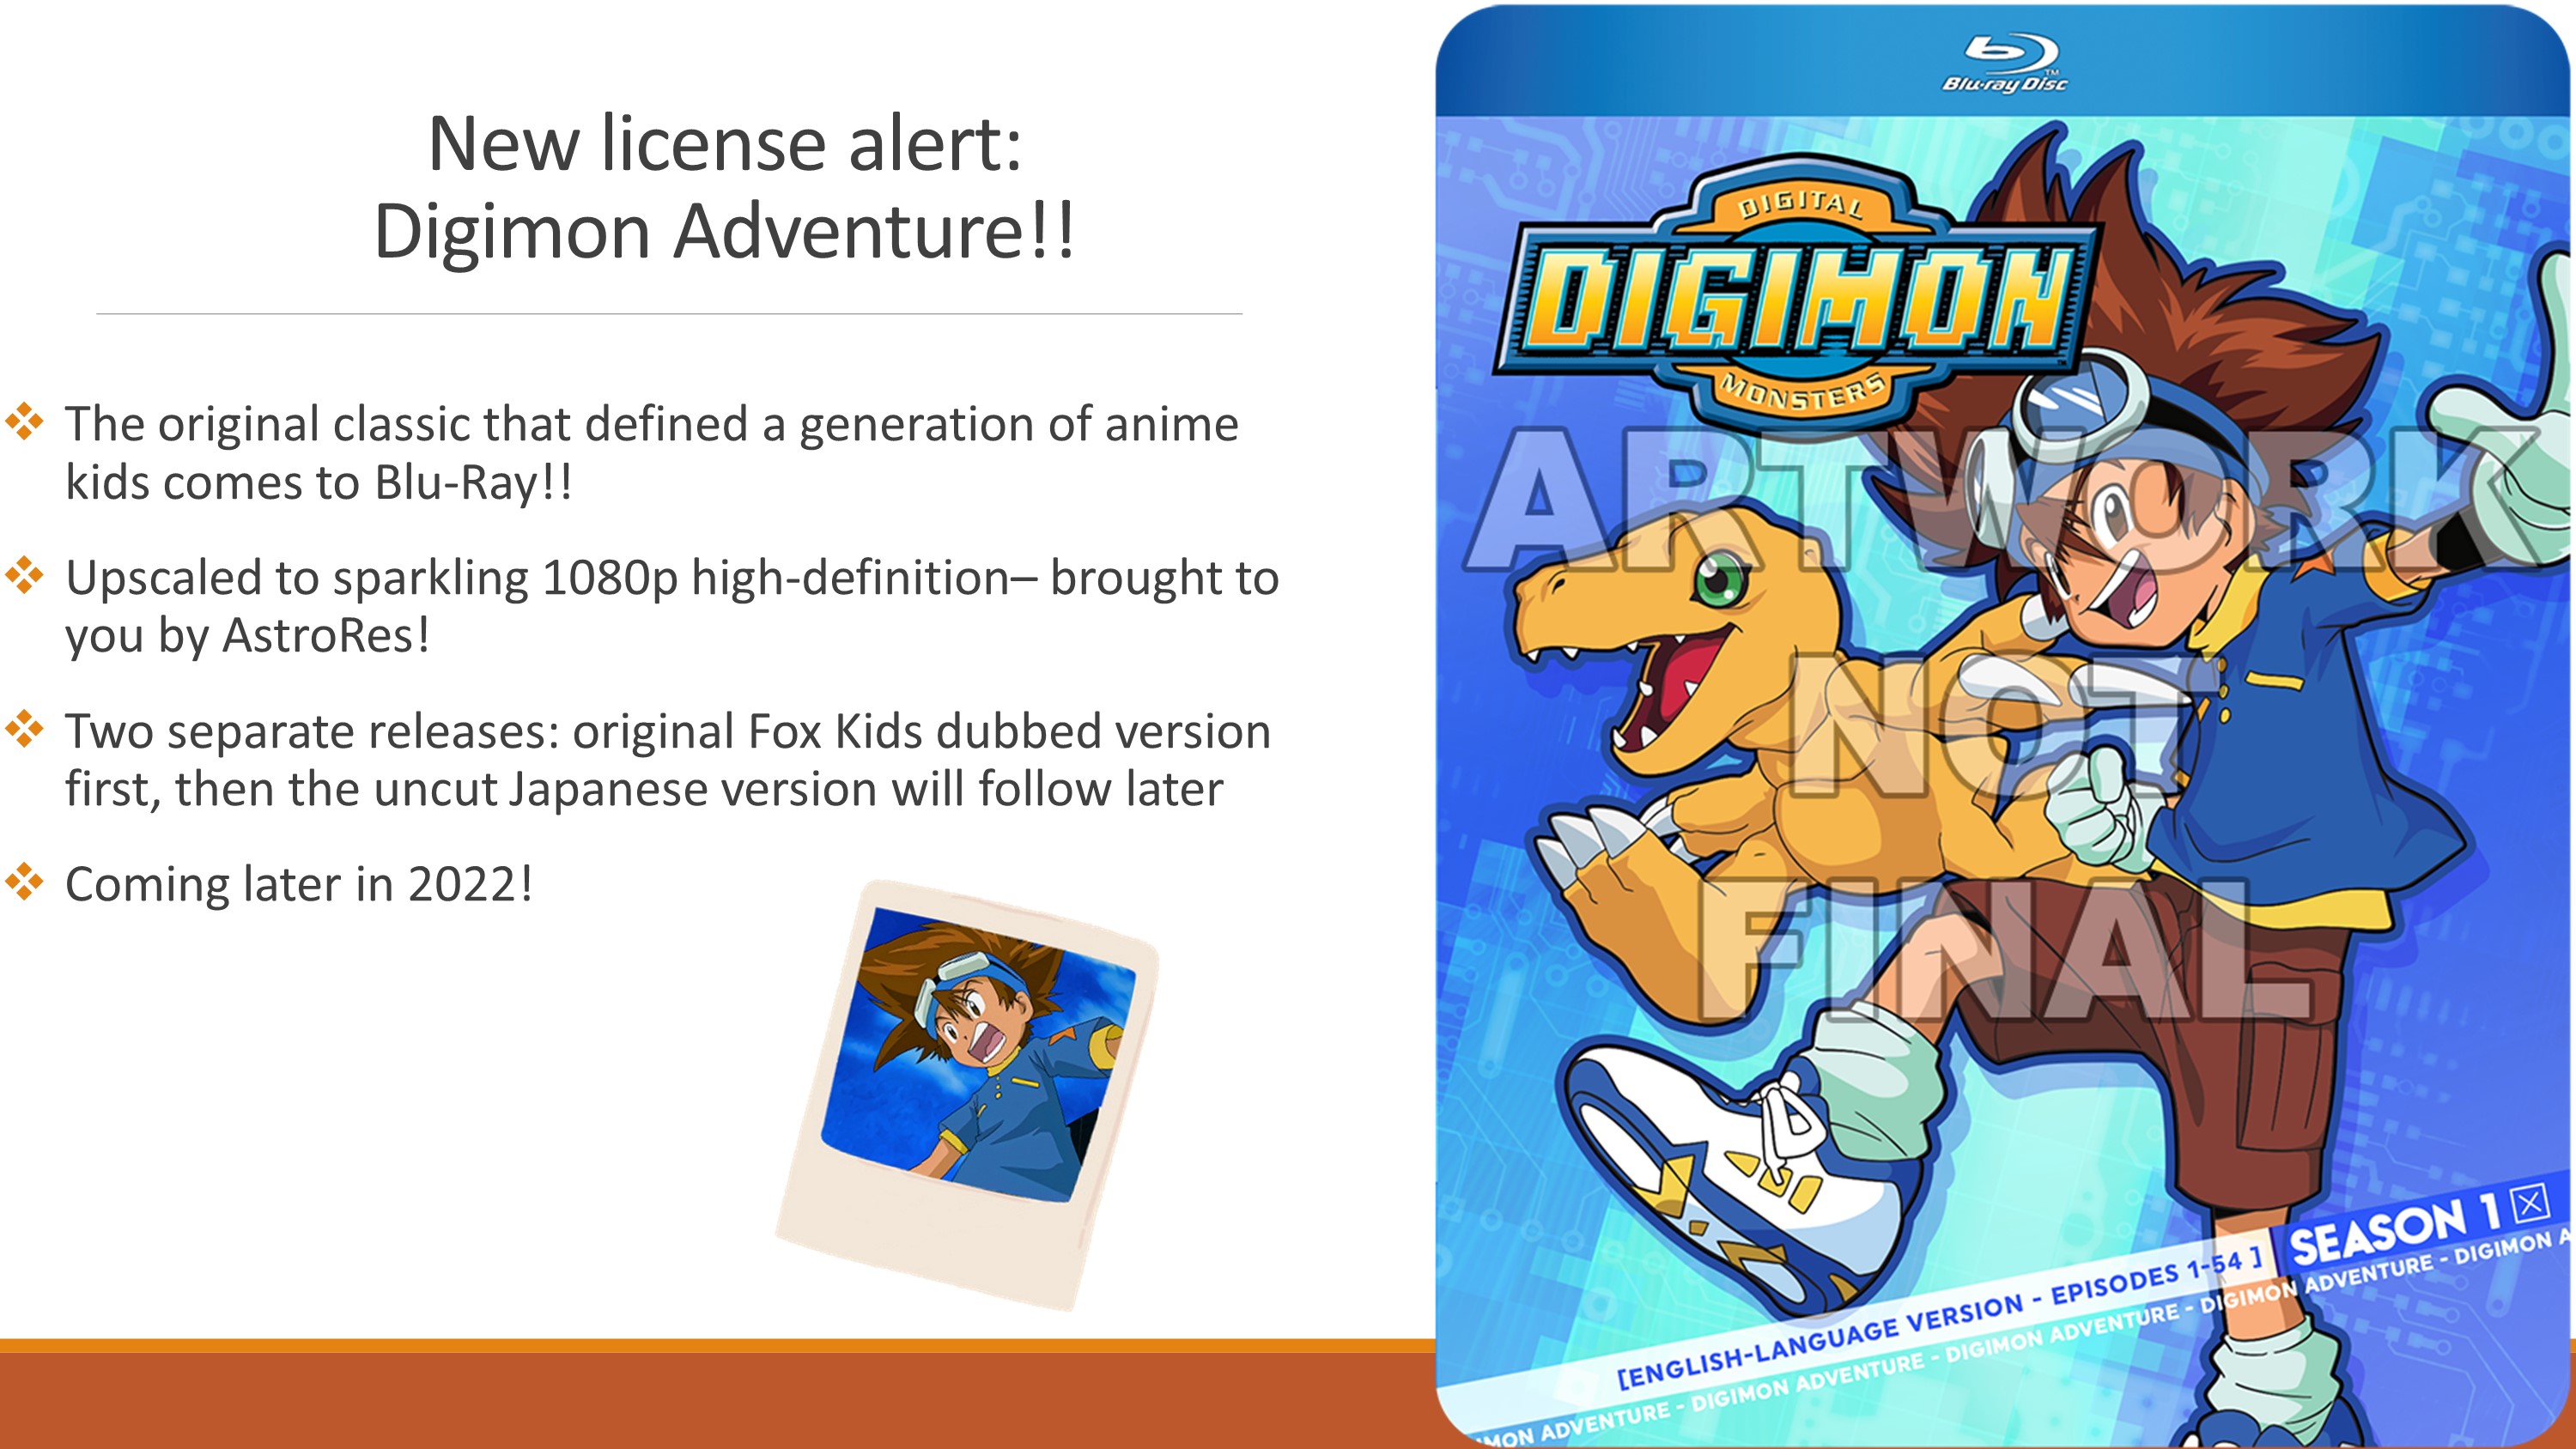 Digimon: Digital Monsters - The Official First Season